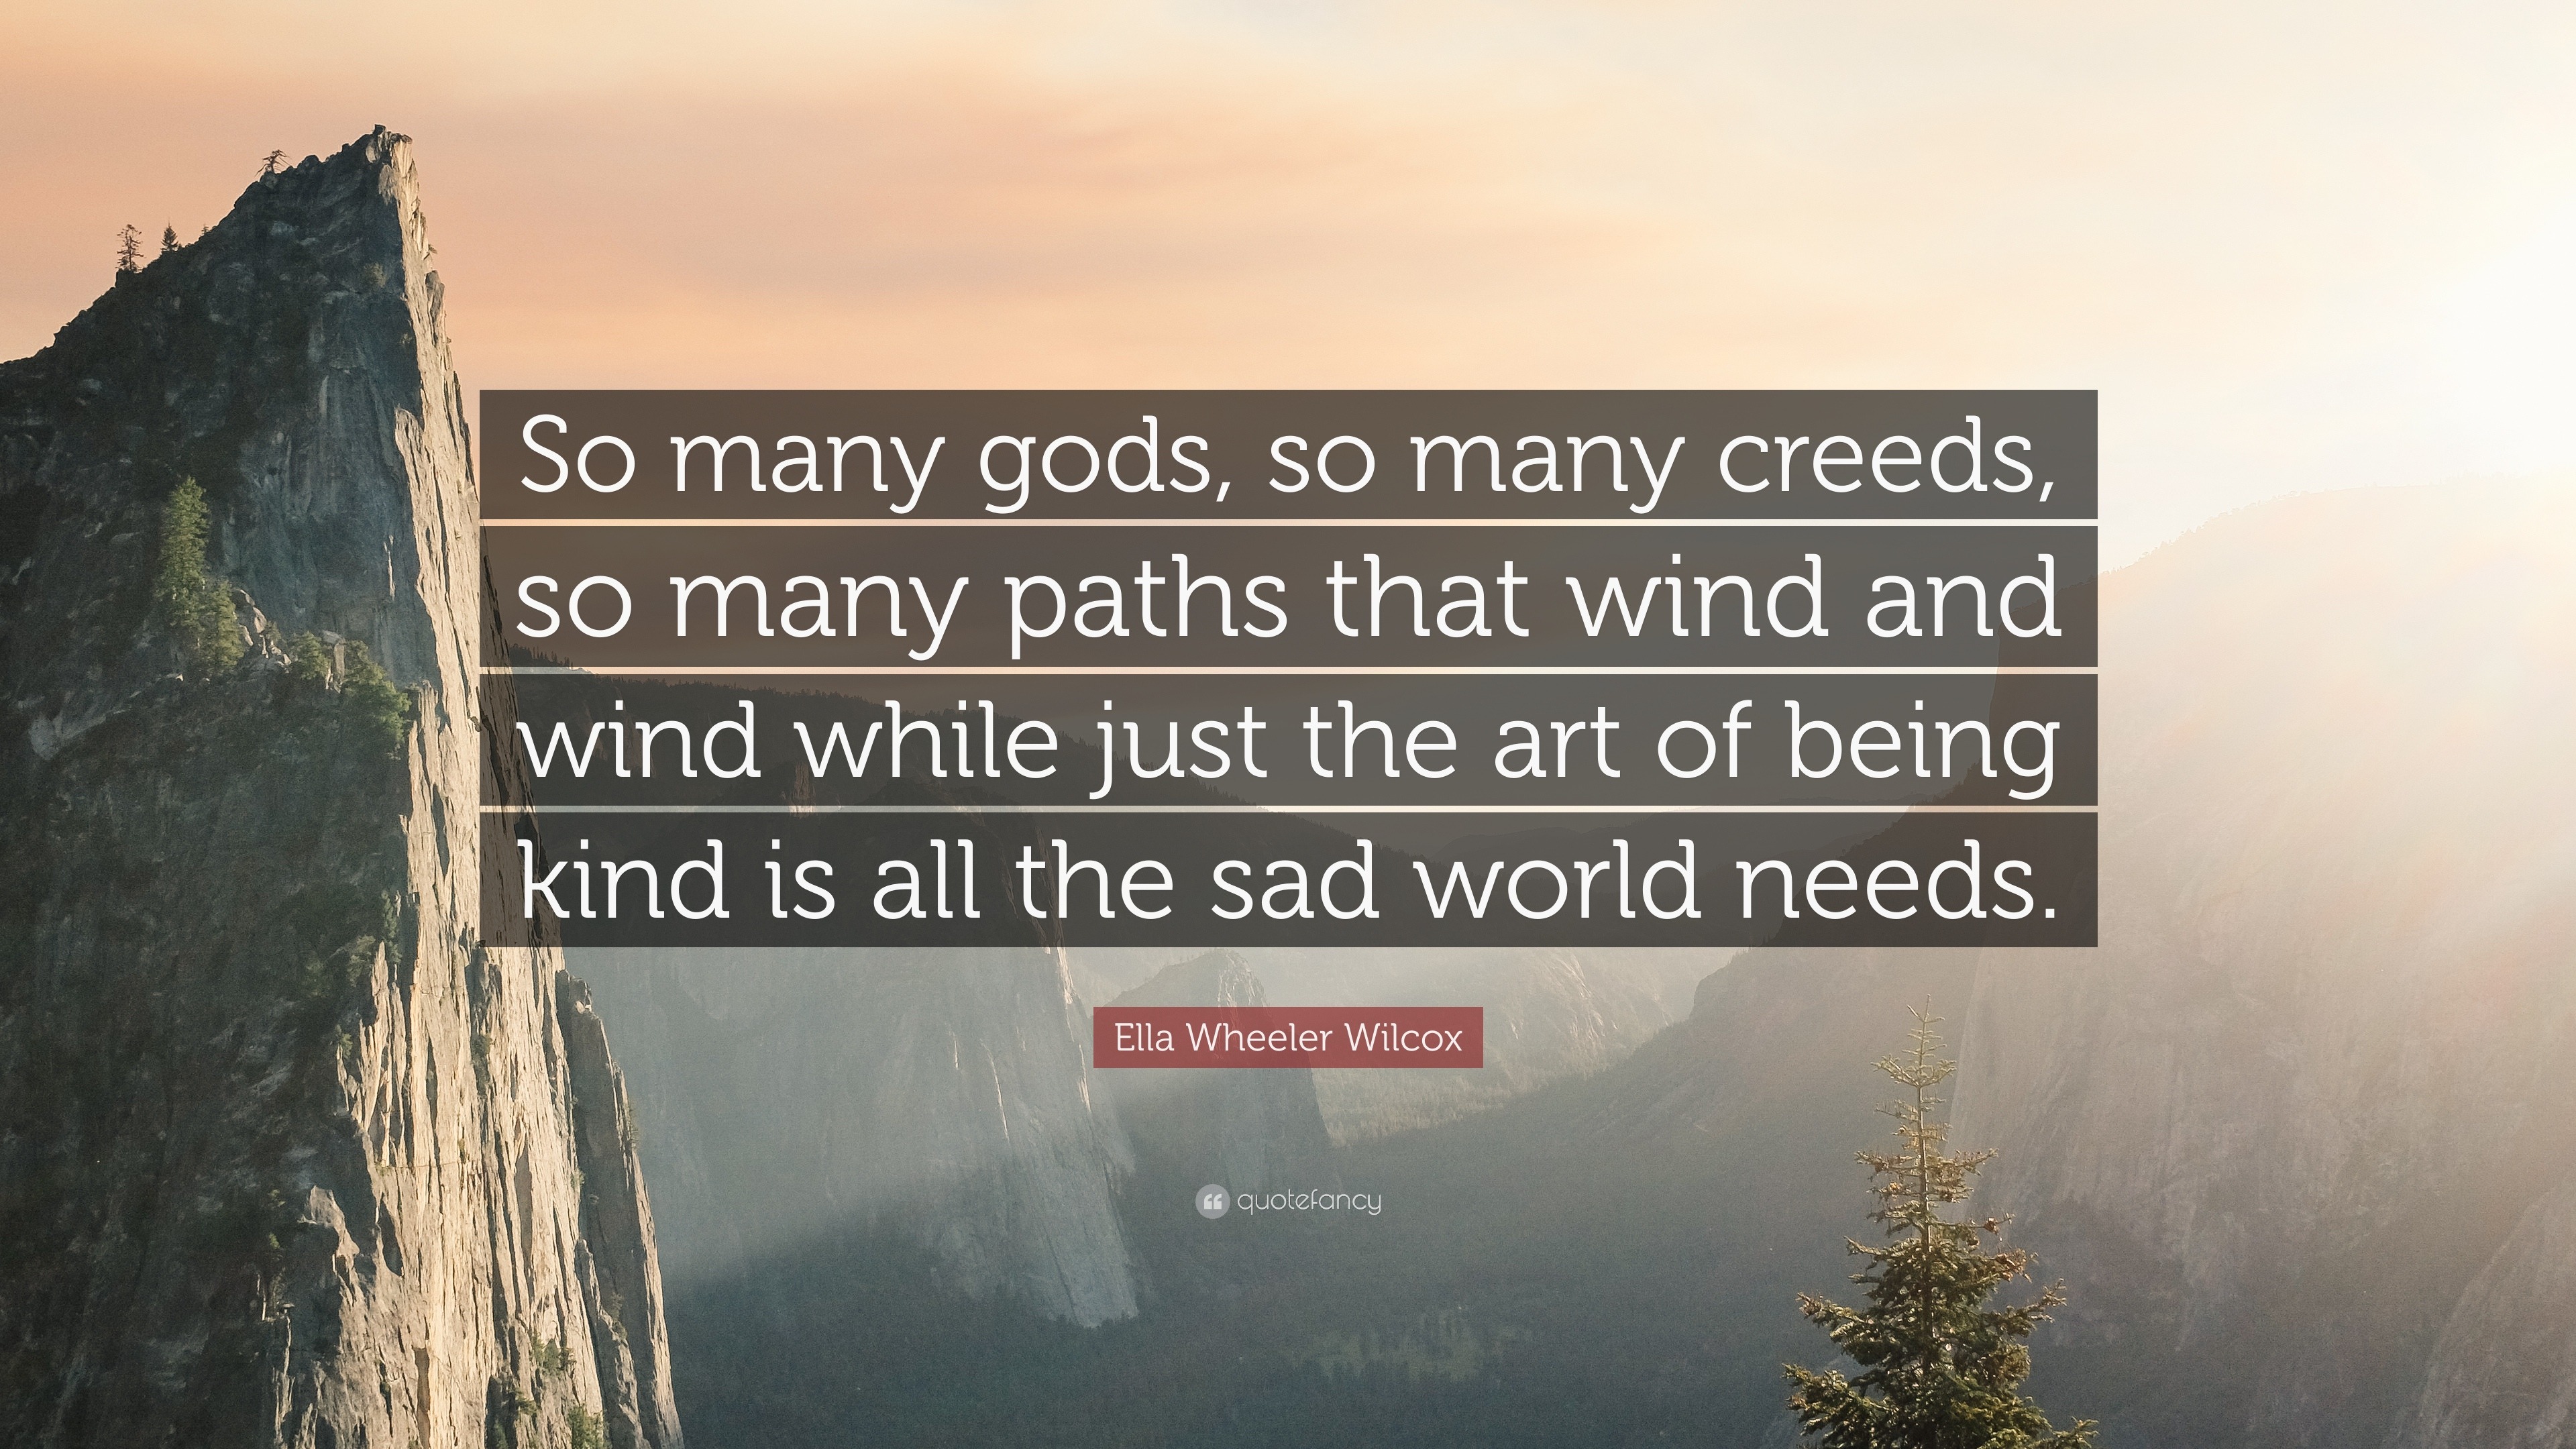 Ella Wheeler Wilcox Quote So Many Gods So Many Creeds So Many Paths That Wind And Wind While Just The Art Of Being Kind Is All The Sad World Nee